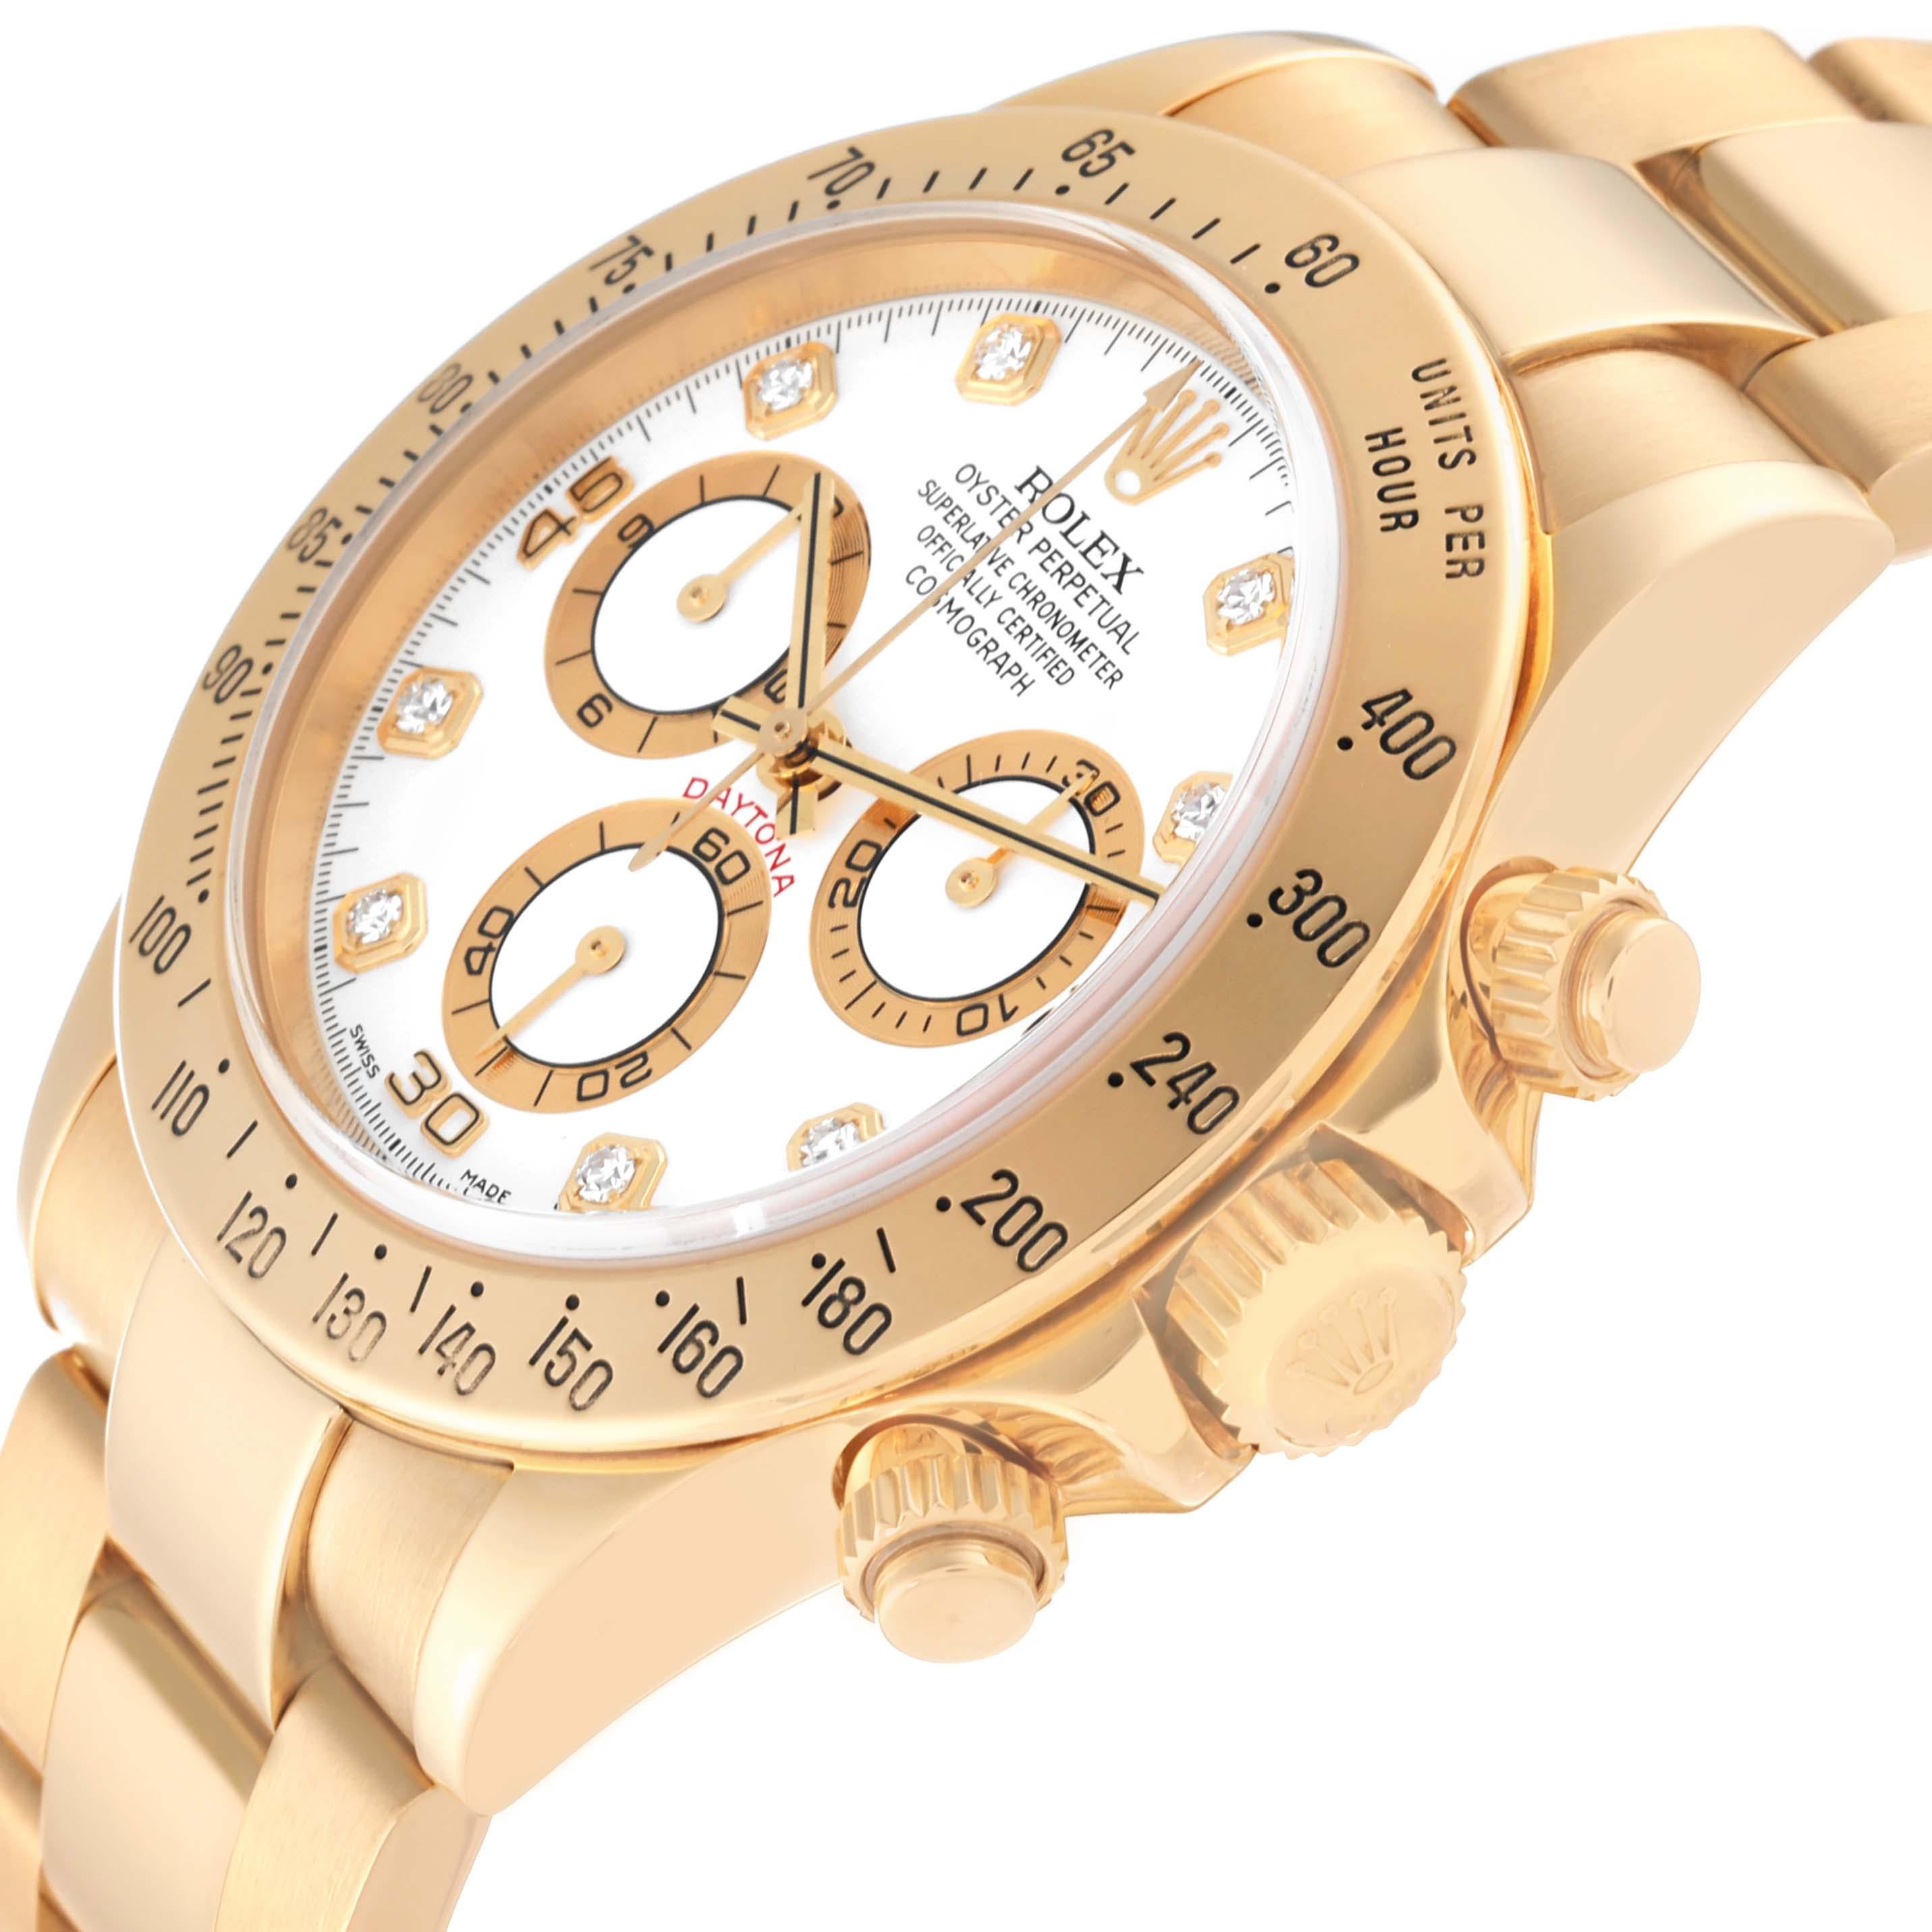 Rolex Daytona Yellow Gold White Diamond Dial Mens Watch 116528 Box Papers For Sale 2